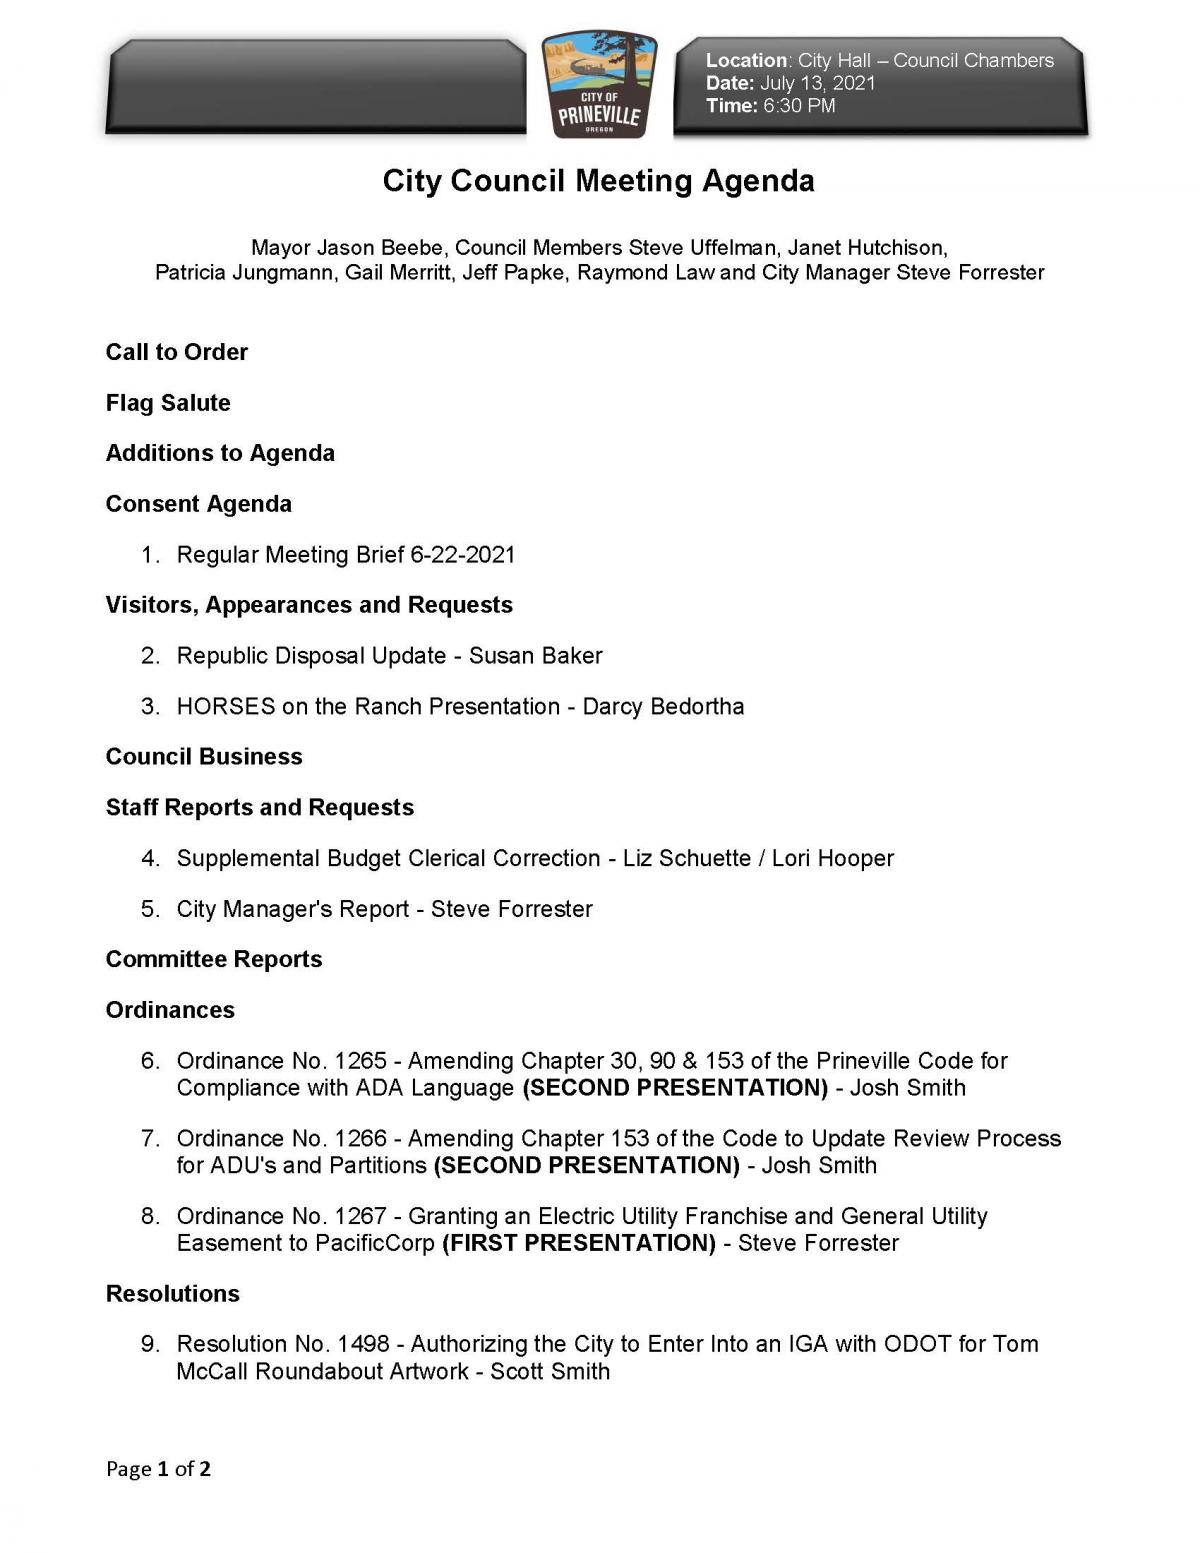 Page 1 of Council Agenda 7-13-2021